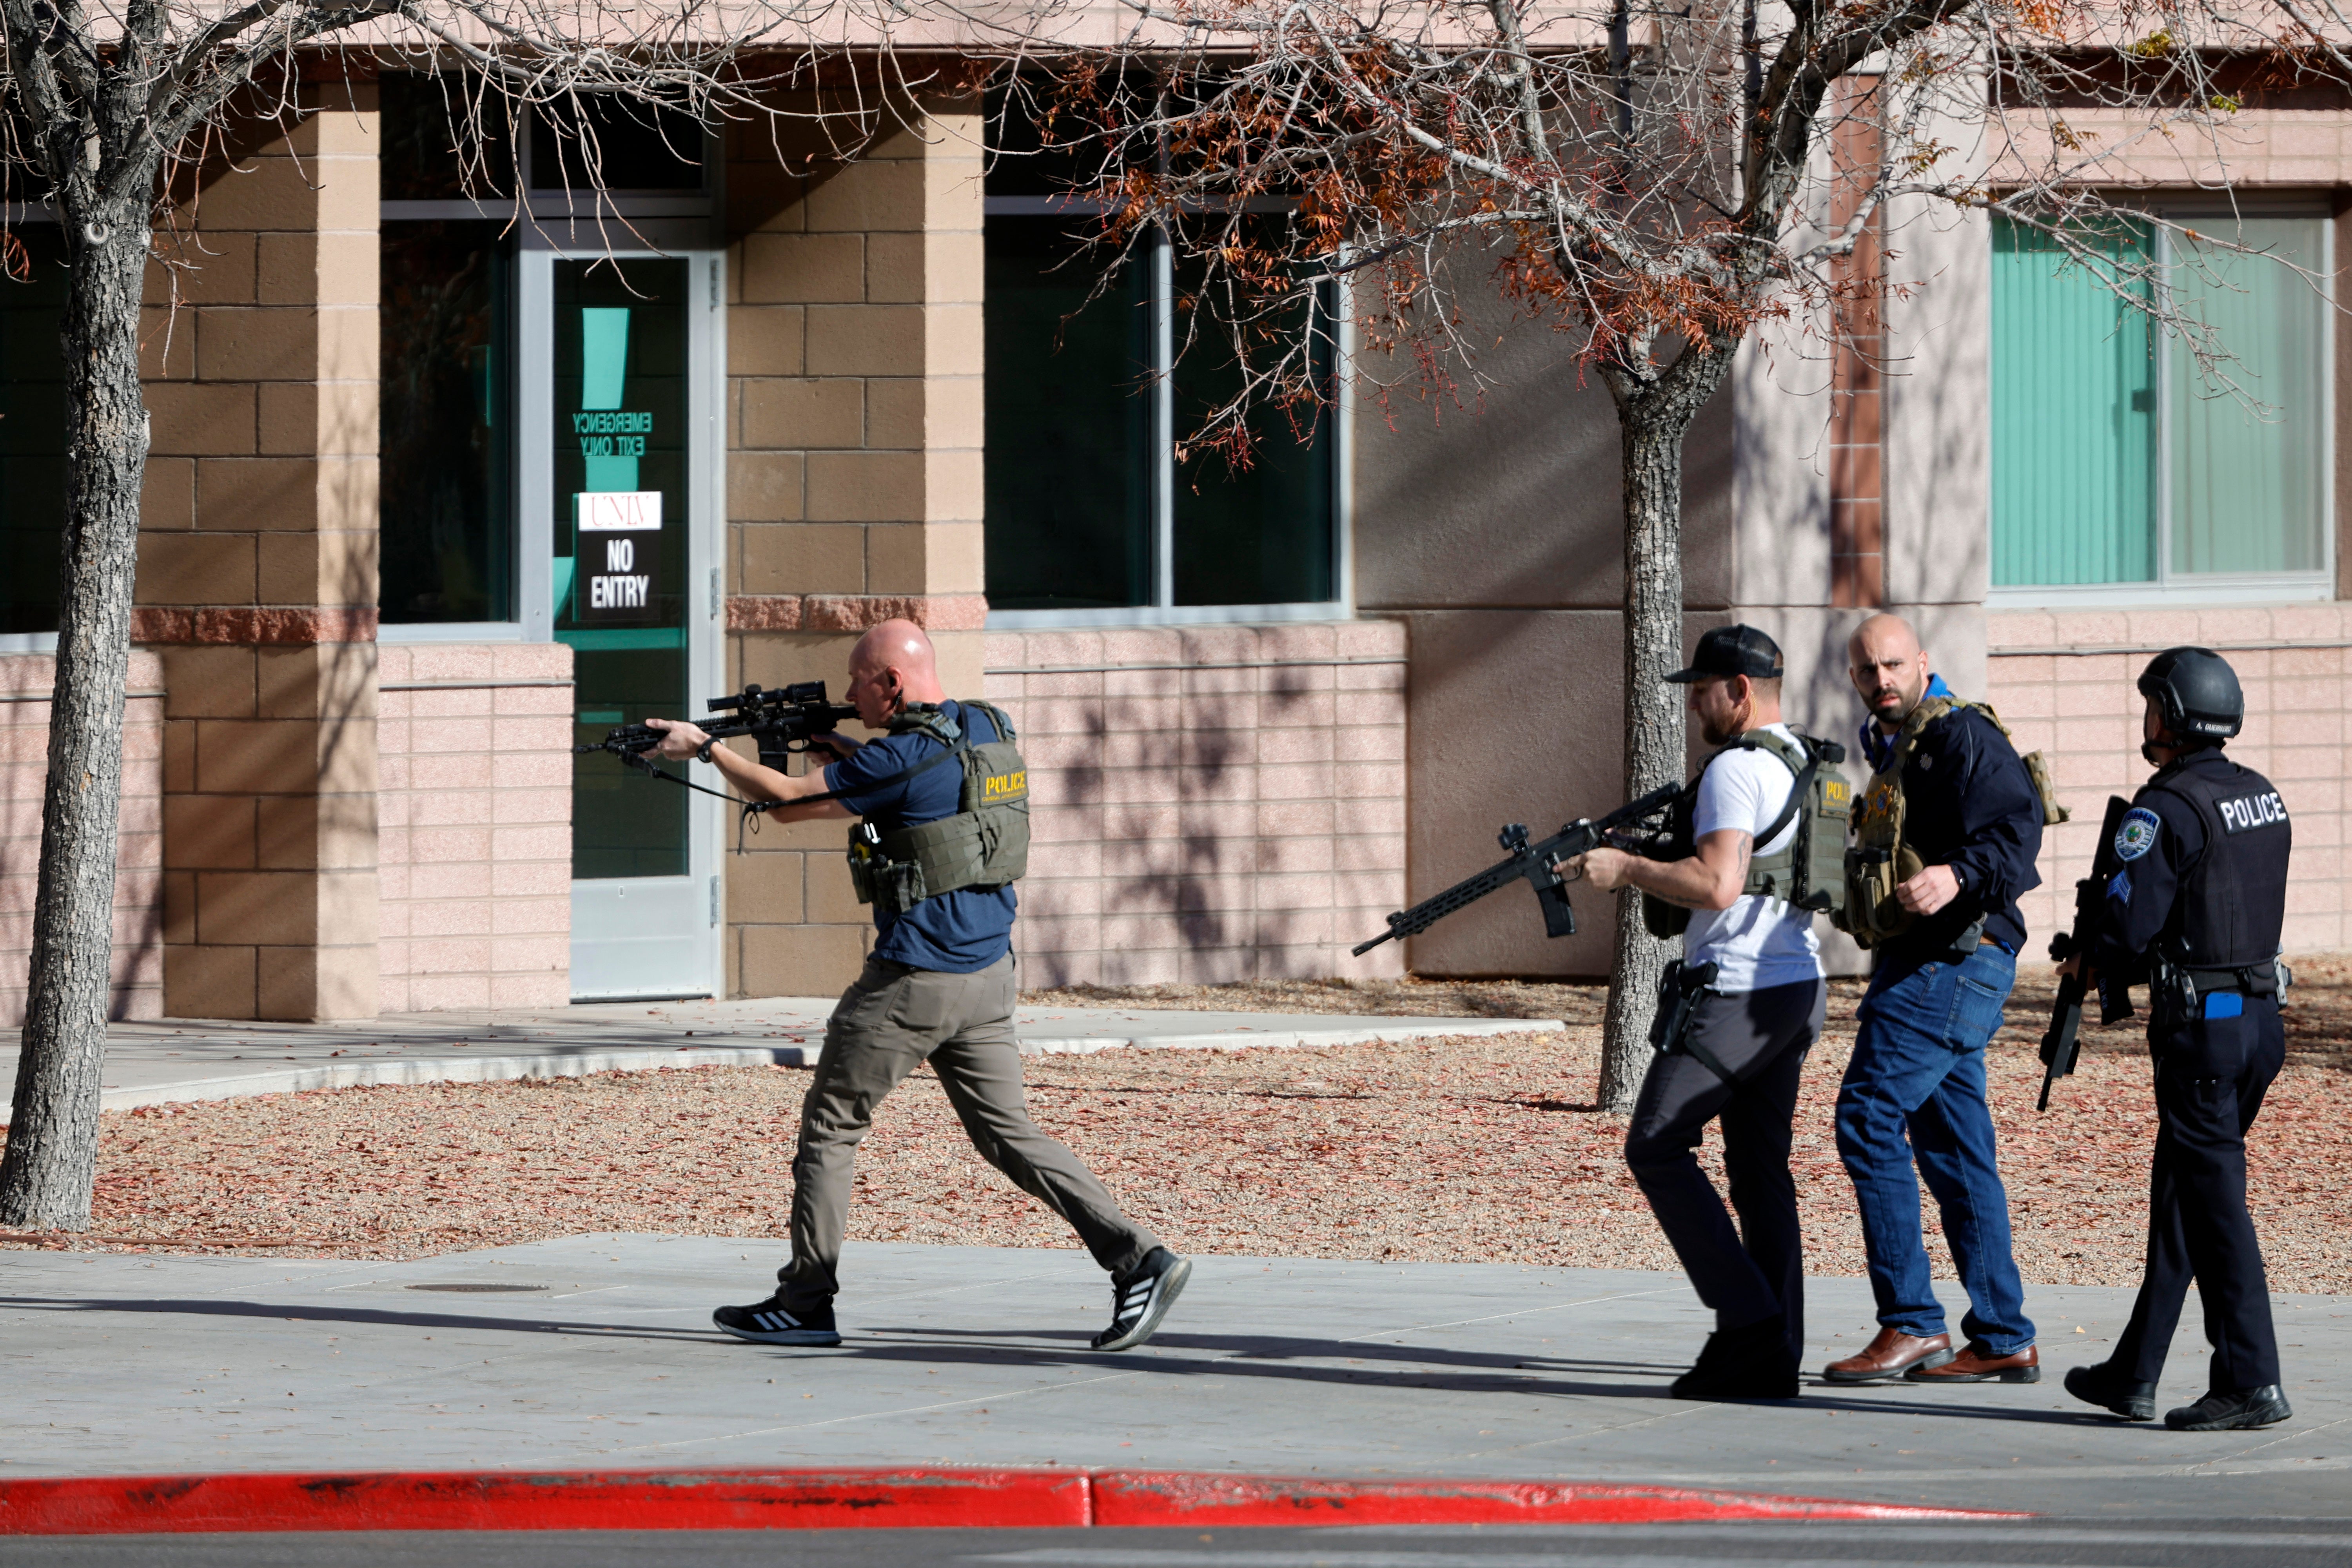 Law enforcement officers head into the University of Nevada after shots fired